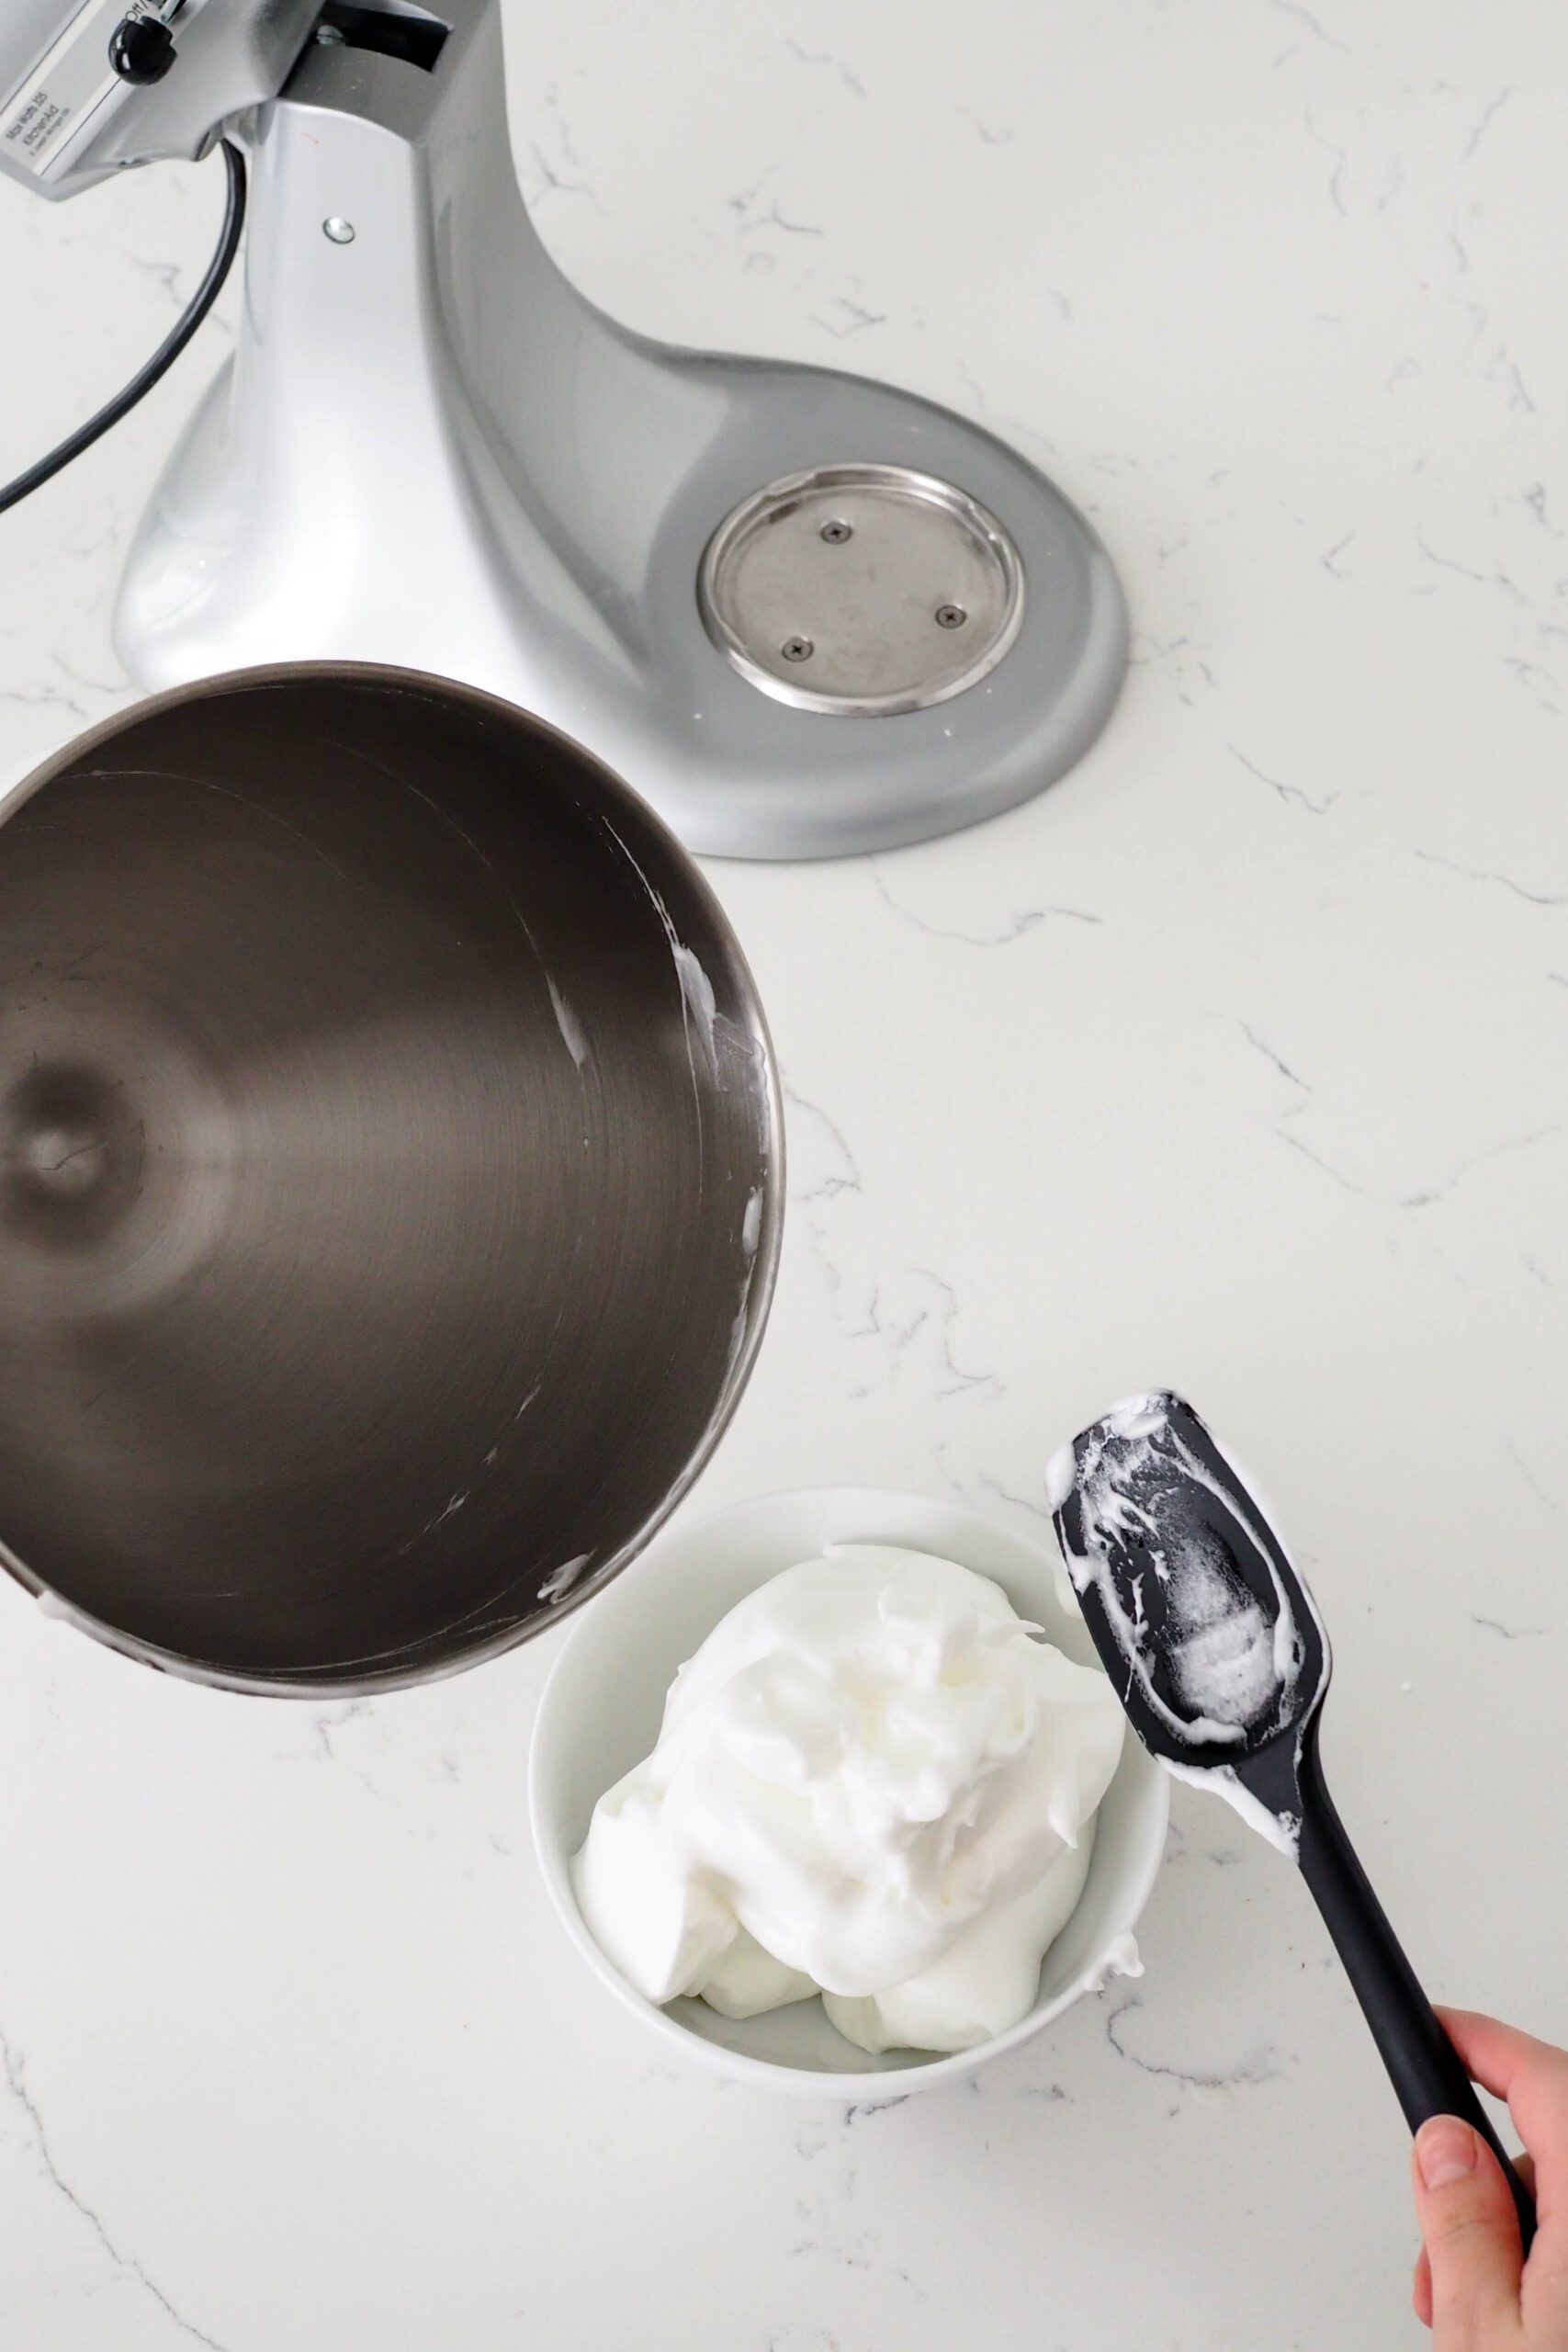 Meringue is scraped out of a mixer bowl into another medium bowl, leaving a clean mixer bowl.